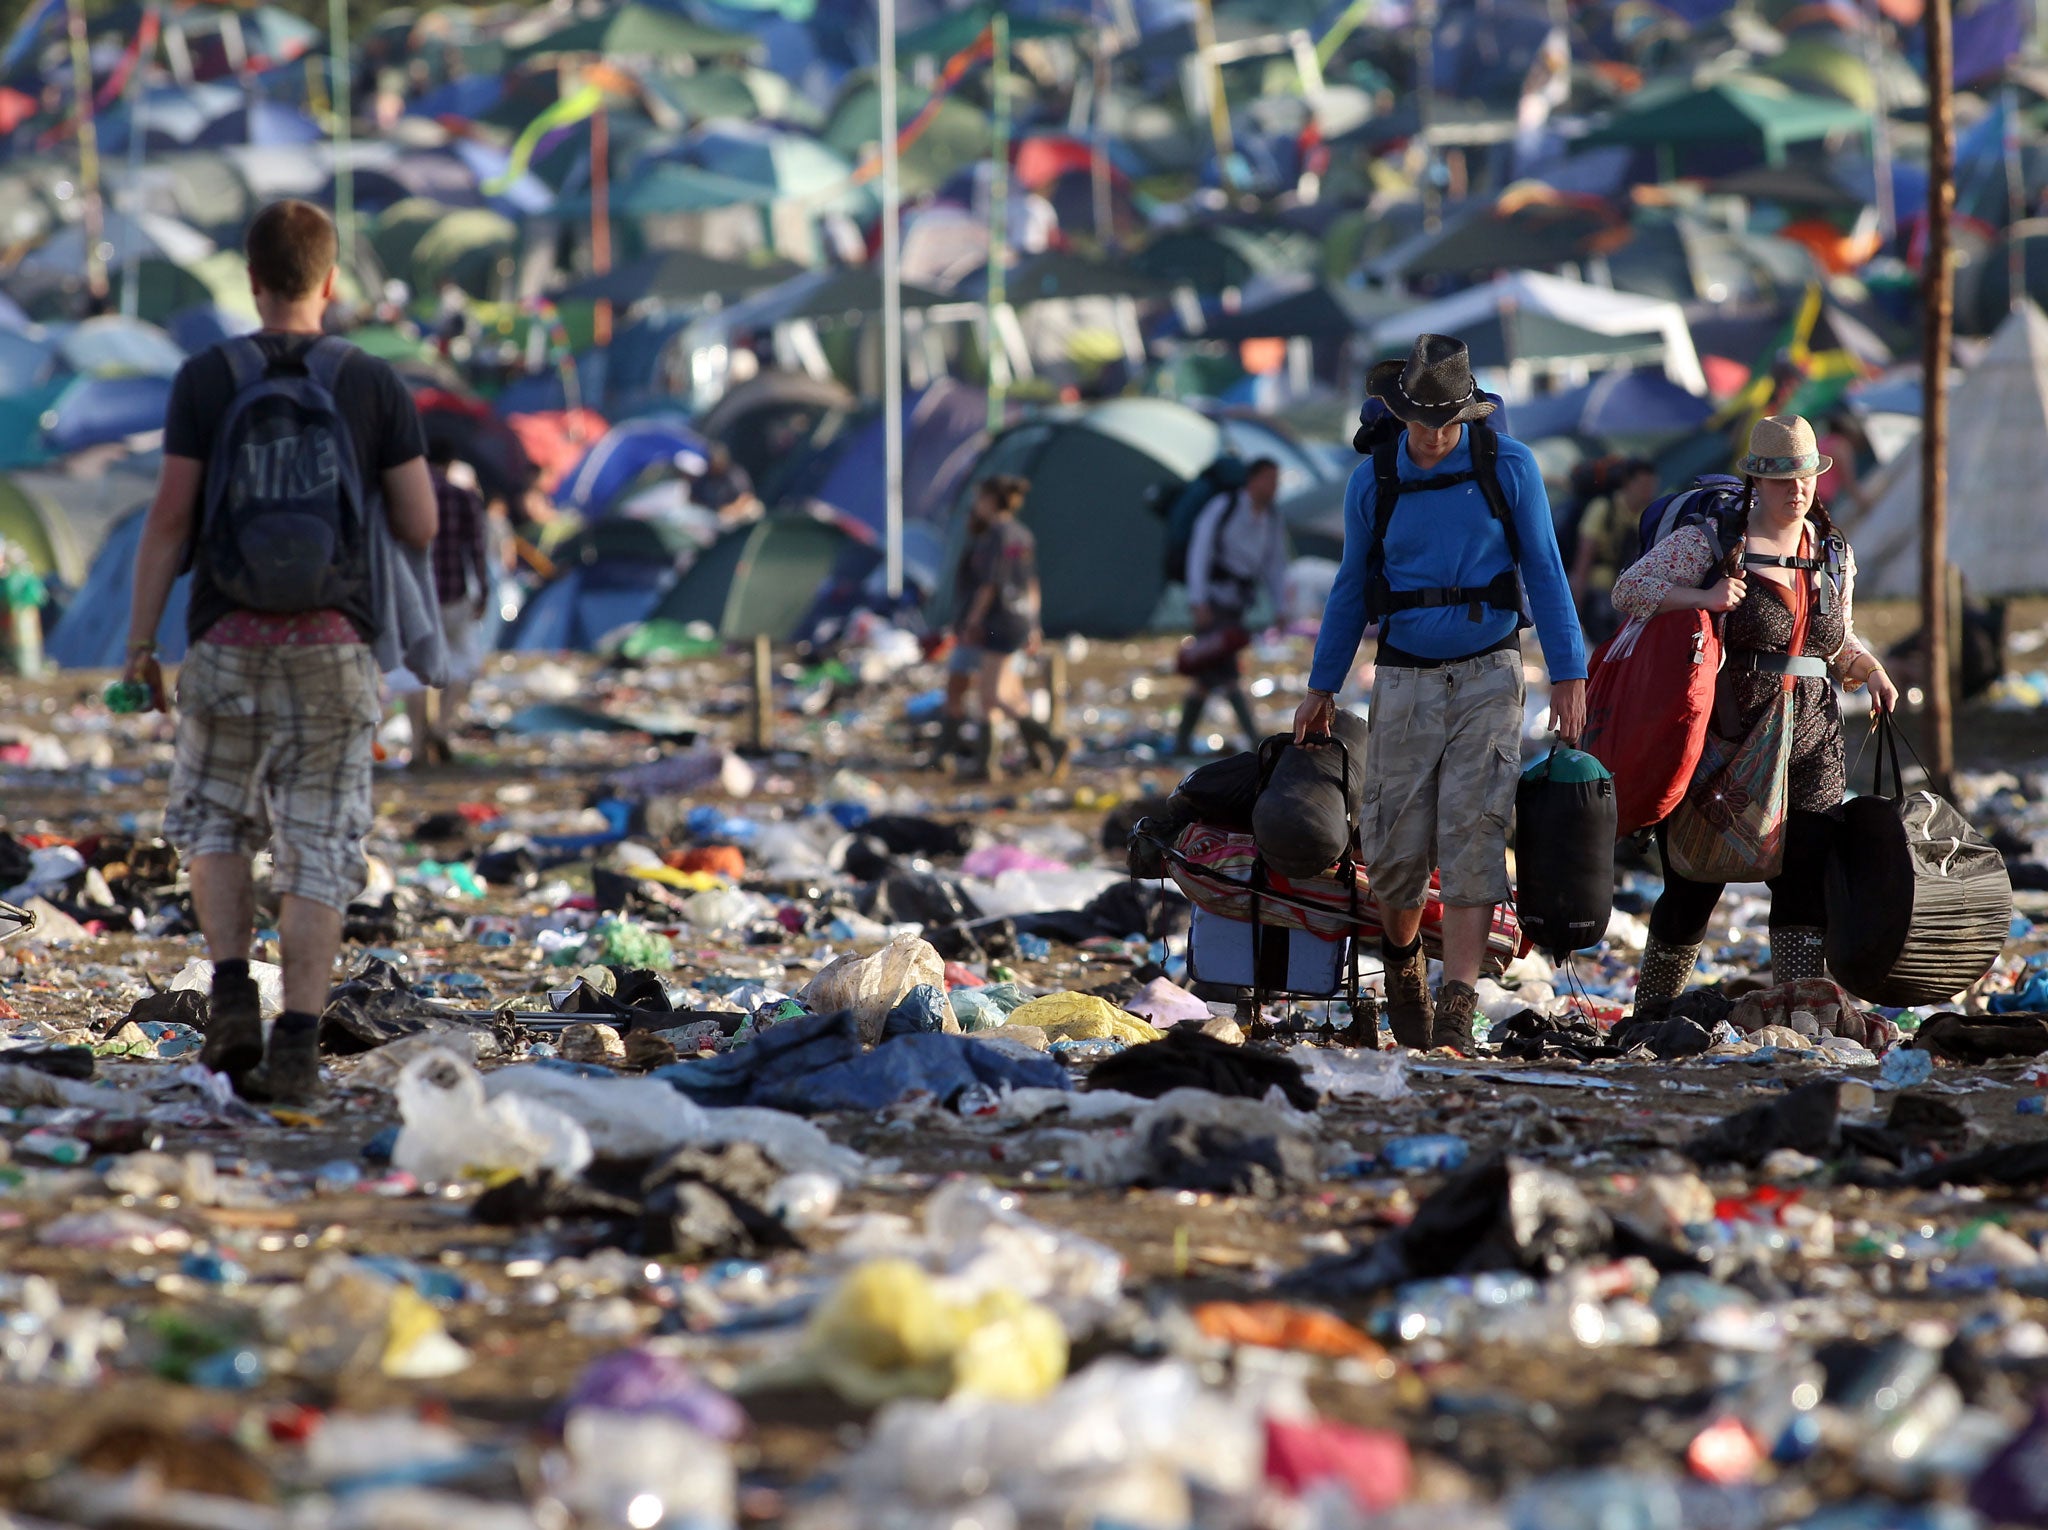 Festival-goers walk through rubbish close to The Pyramid Stage as they leave following the Glastonbury festival near Glastonbury, Somerset, on June 27, 2011.